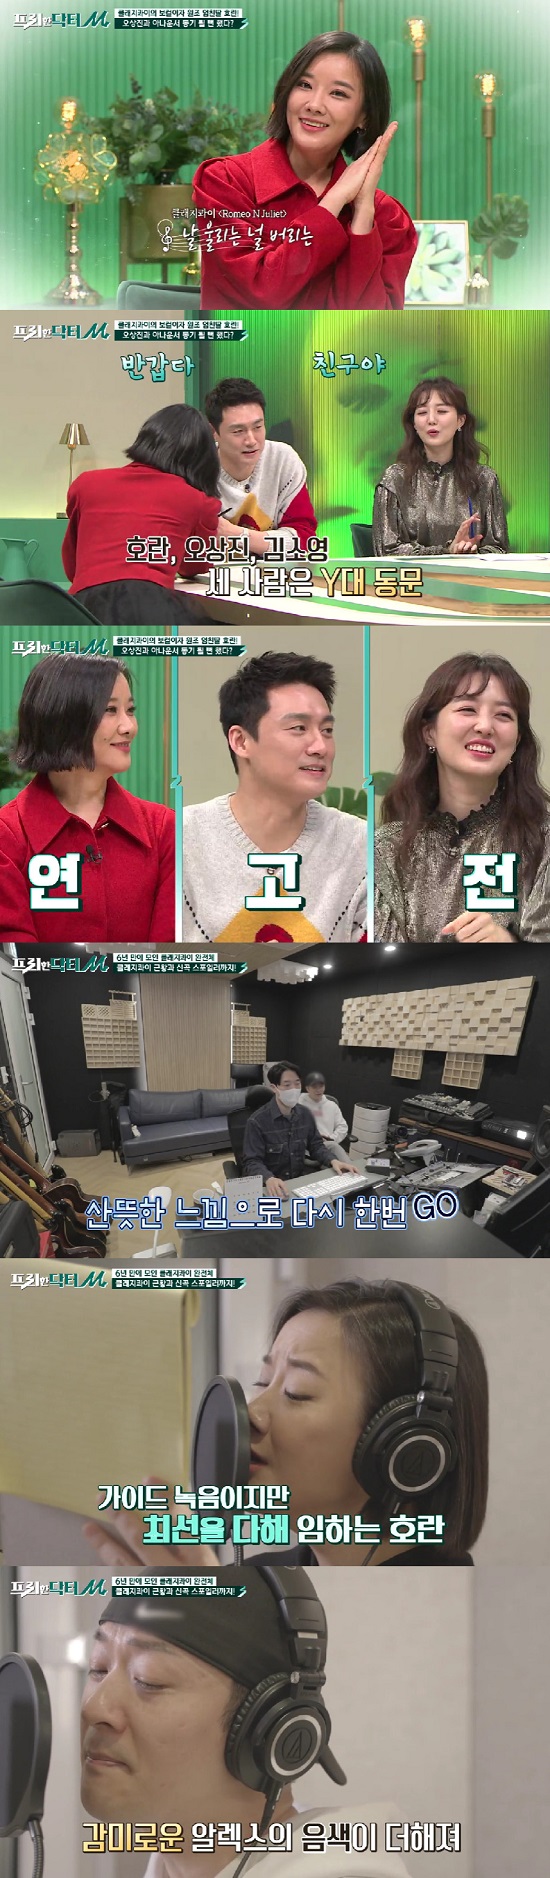 In the TVN entertainment program Free Doctor M broadcasted on the 7th, cladgequi The Legend of Haolan appeared as a guest.On this day, Oh Sang-jin expressed his familiarity to The Legend of Haolan as an alumni of Y school, and Kim So Young was also welcomed and welcomed.The Legend of Haolan is a nest for me for a long time, he said. I have been working on music for a long time, and I really think I met again yesterday.The Legend of Haolan announced his comeback that cladgequi is the album of six years since 2016 full album.The Legend of Haolan said, (Cladgequie) always had some room in the same way, it was so warm.And most of all, I was grateful, he said. I made a very big mistake six years ago. He mentioned the past Drunk driving.The Legend of Haolan said: I was so guilty at the time.And I was so sorry that I had to press the cladgequie members at that time, so I talked to the leader DJ cladge several times.  Cladgequi is a very precious team and you can leave me alone. The Legend of Haolan said: Mr Cladge just said, What do you say? I was so grateful for the indifference.As if it were natural, I decided to be loyal to Mr. Cladge and said, I thought I would give my life to this person.The Legend of Haolan then expressed his gratitude to the members, saying, The words that my brother said then turned around and eventually became a reality with this music album.Oh Sang-jin asked, I would like you to see various aspects of the Legend of Haolan, but what kind of view do you want me to see in the future? And The Legend of Haolan said, I will live hard so that I can show and prove myself to be good rather than wanting to see me.Photo = tvN